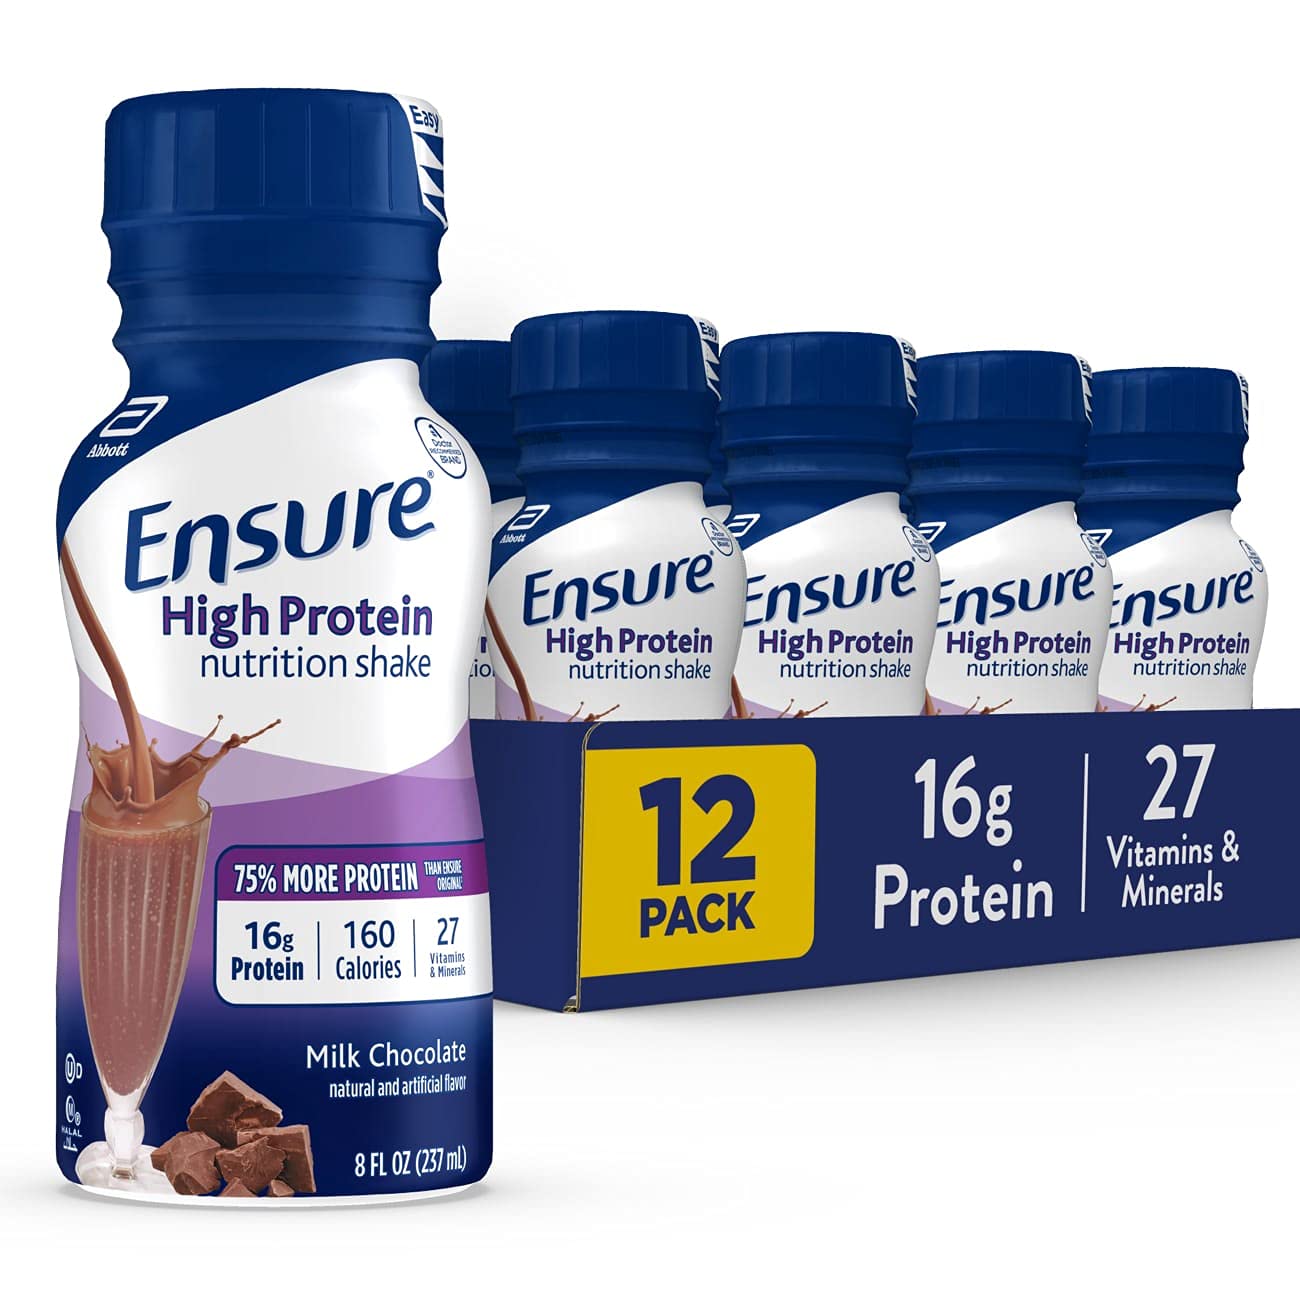 Ensure High Protein Nutritional Shake with 16g of Protein, Ready-to-Drink Meal Replacement Shakes, Low Fat, Milk Chocolate, 8 Fl